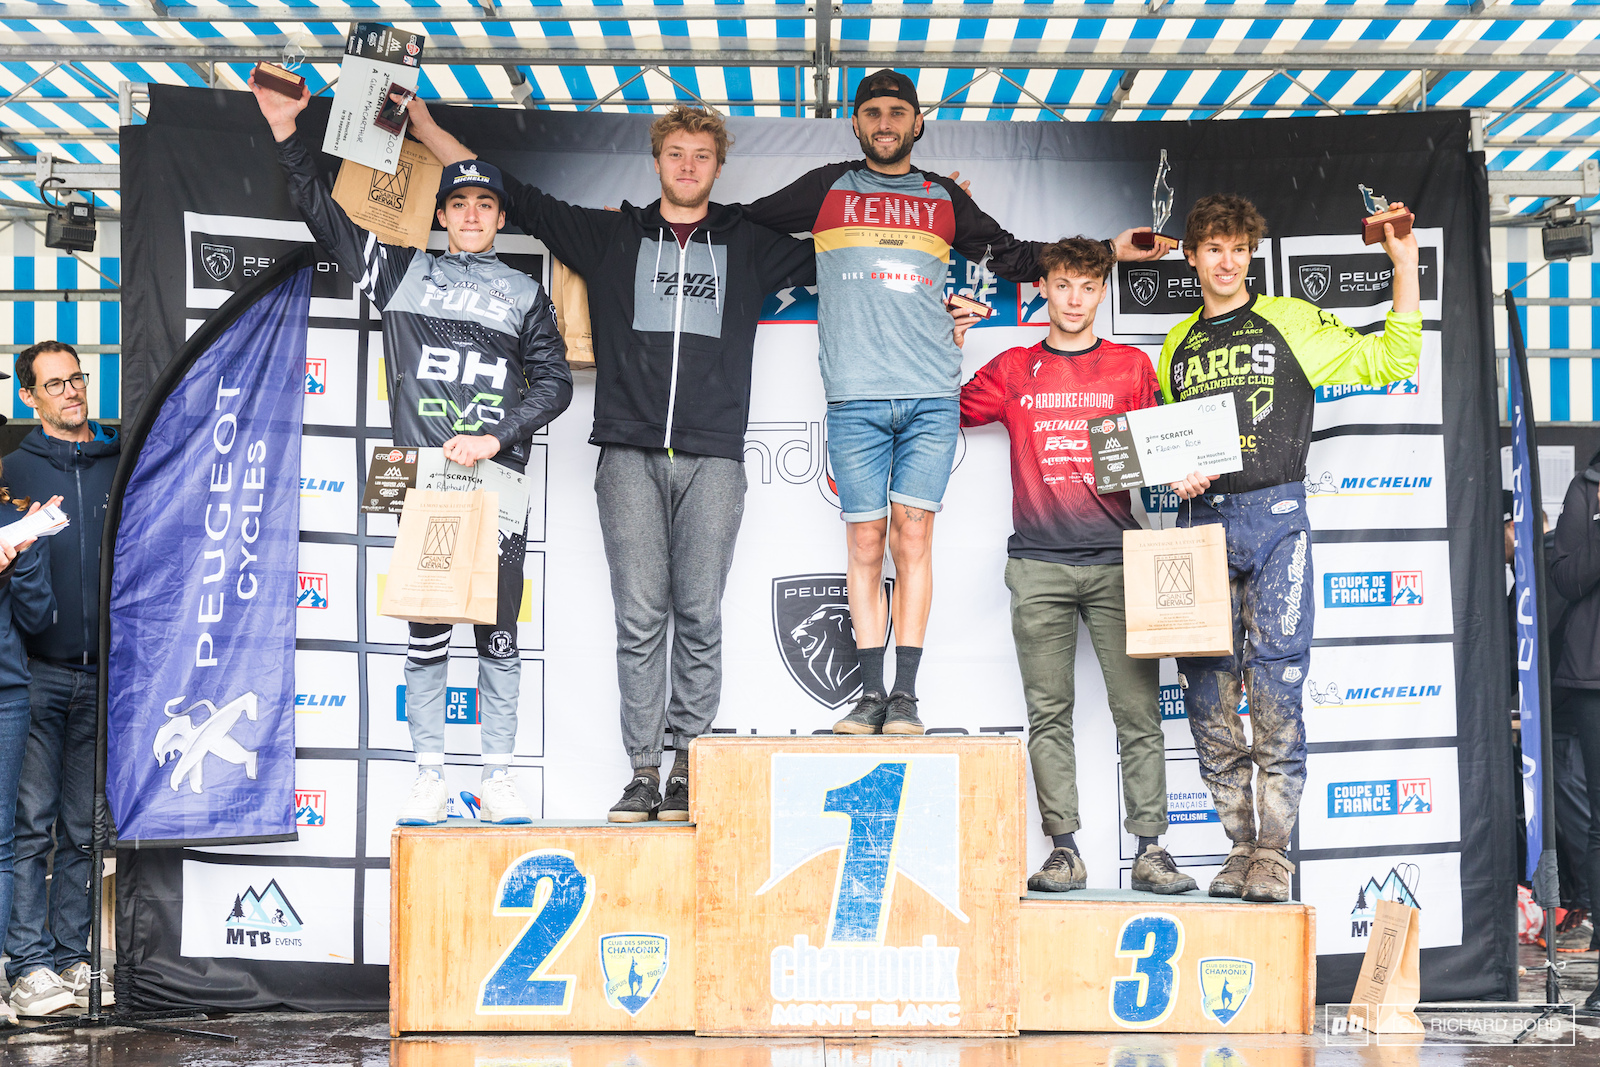 Podium scratch of this week-end in Les Houches.